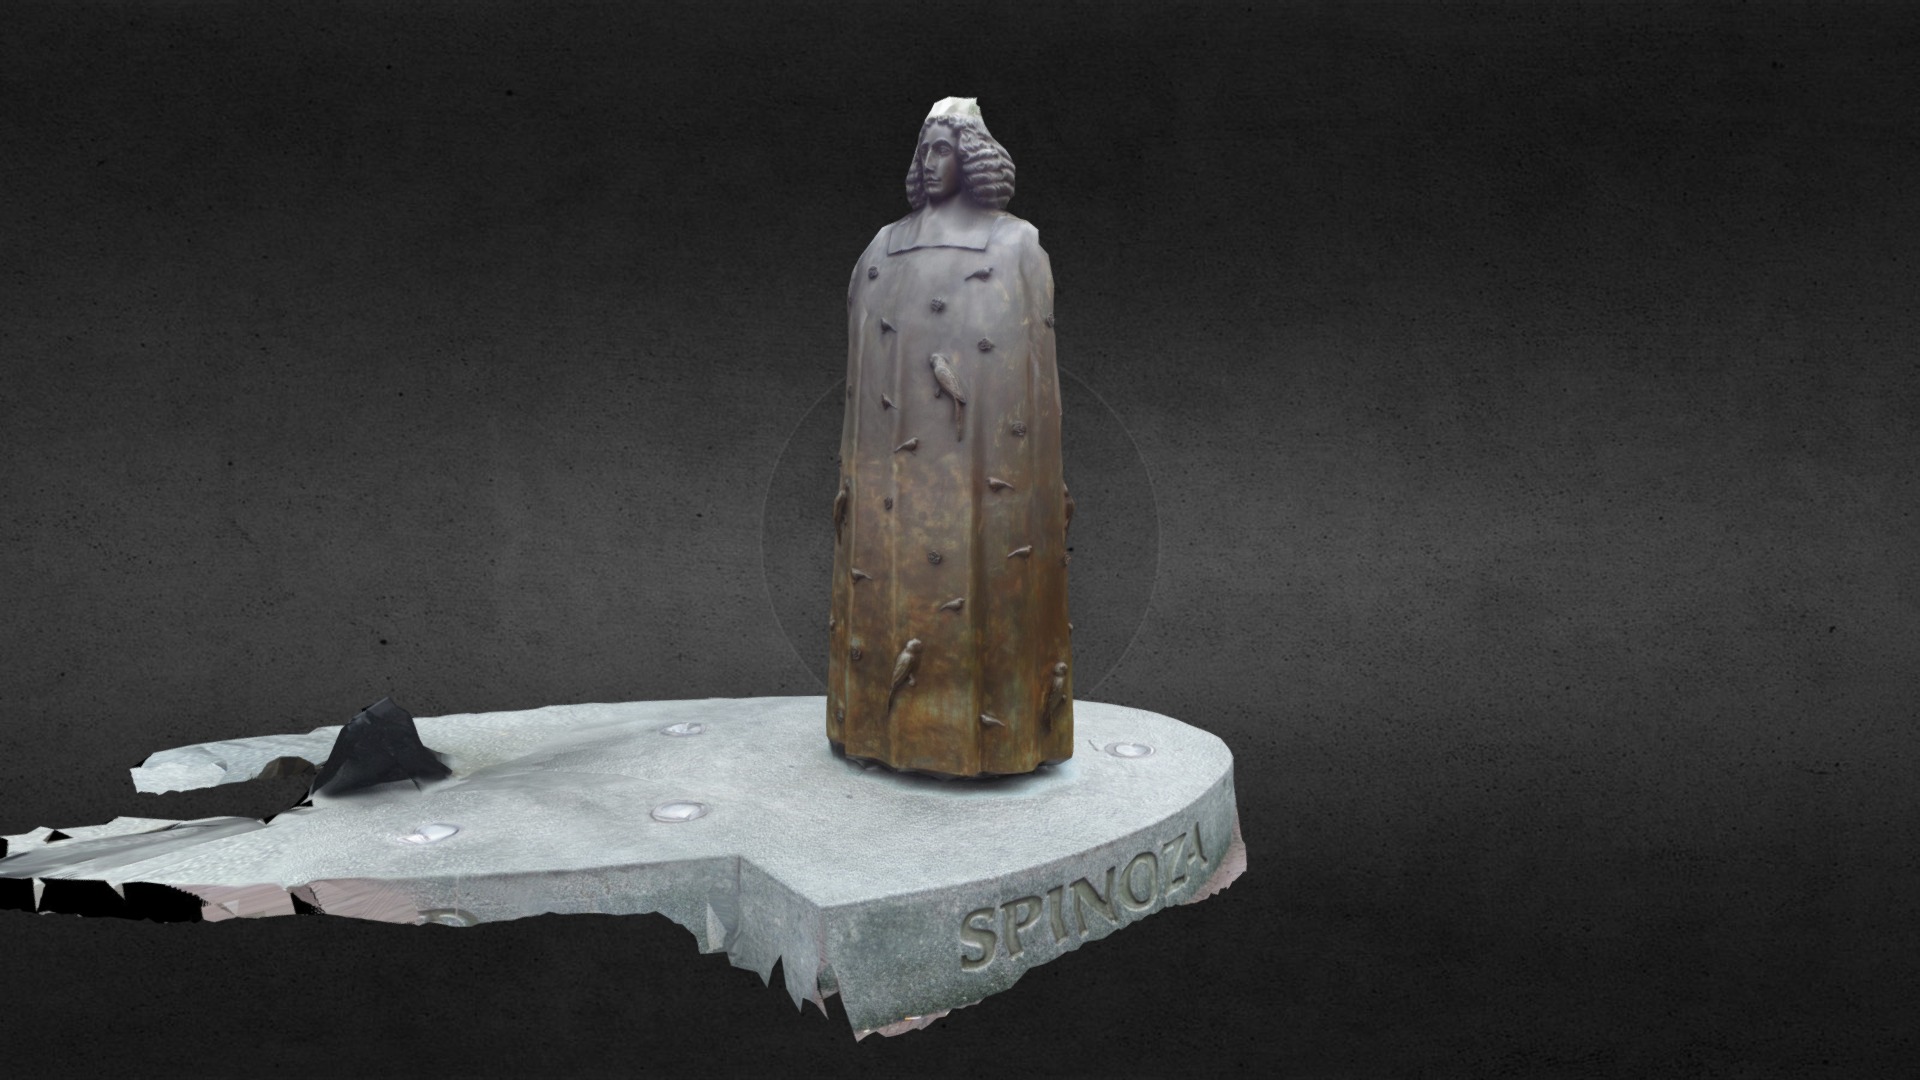 3D model Spinoza – Amsterdam - This is a 3D model of the Spinoza - Amsterdam. The 3D model is about a statue on a table.